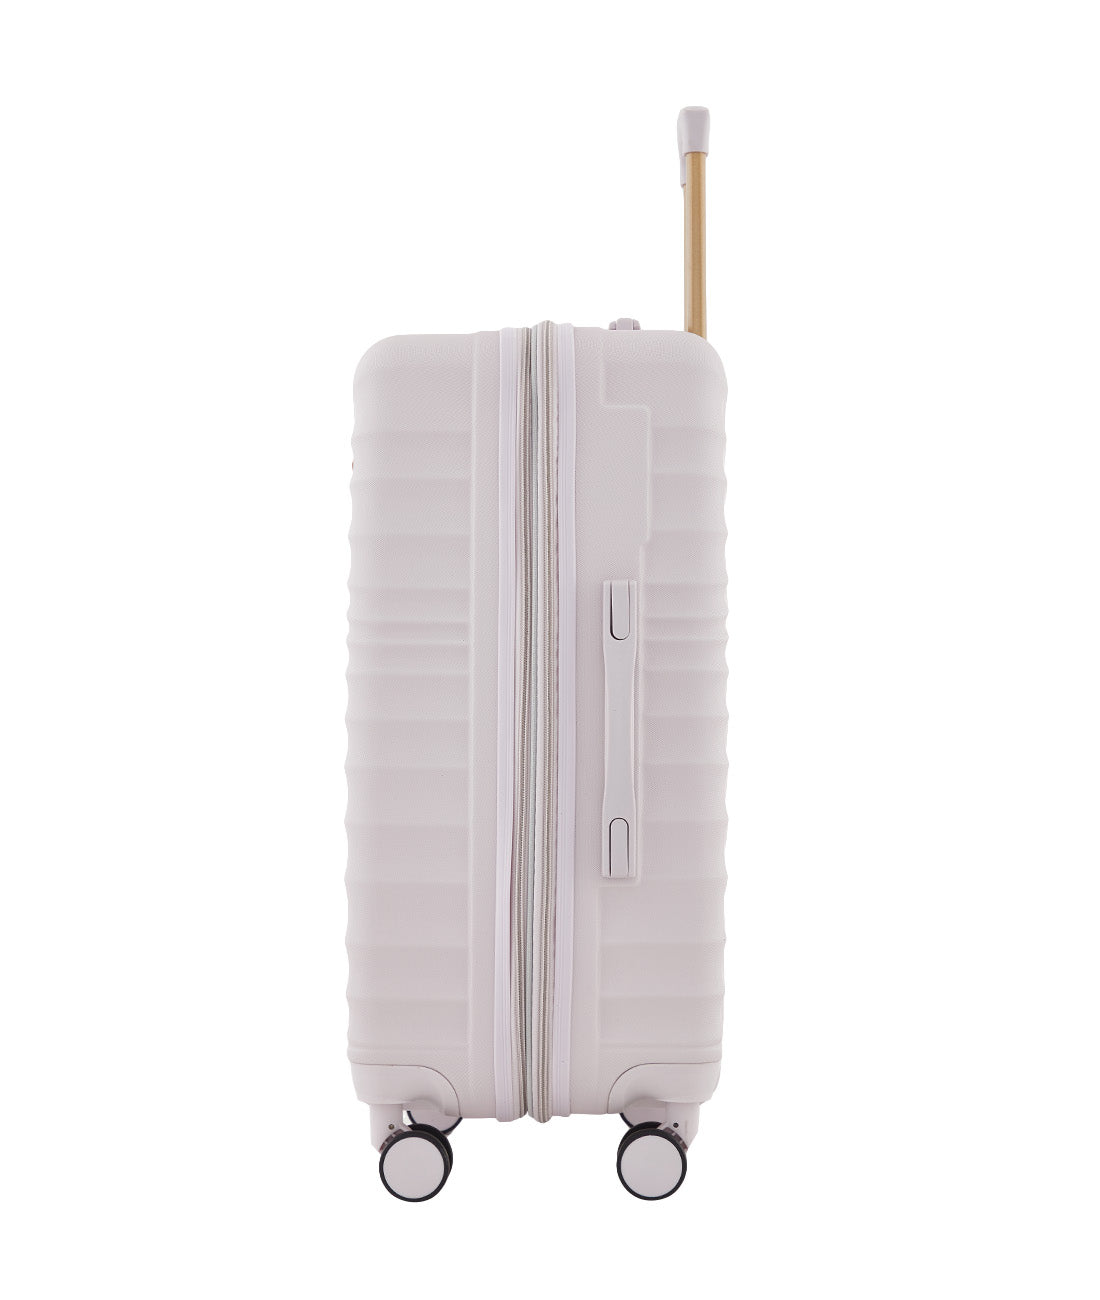 Kensie | Signoria Collection Collection | 3PC Luggage Set